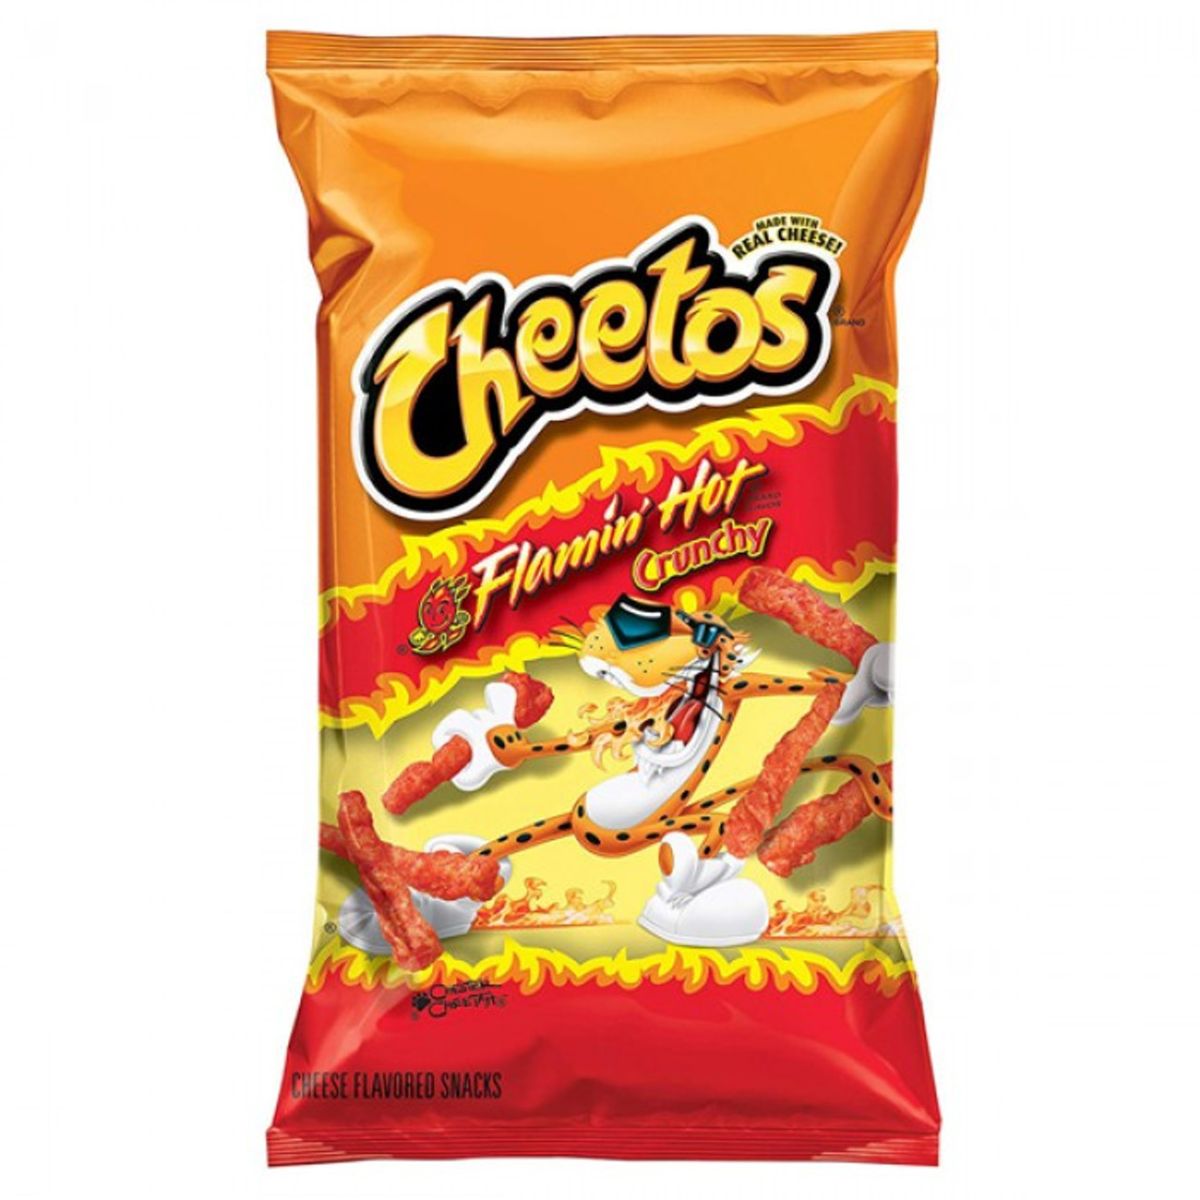 Cheetos - Flamin Hot Crunchy - 226.8g on a white background.